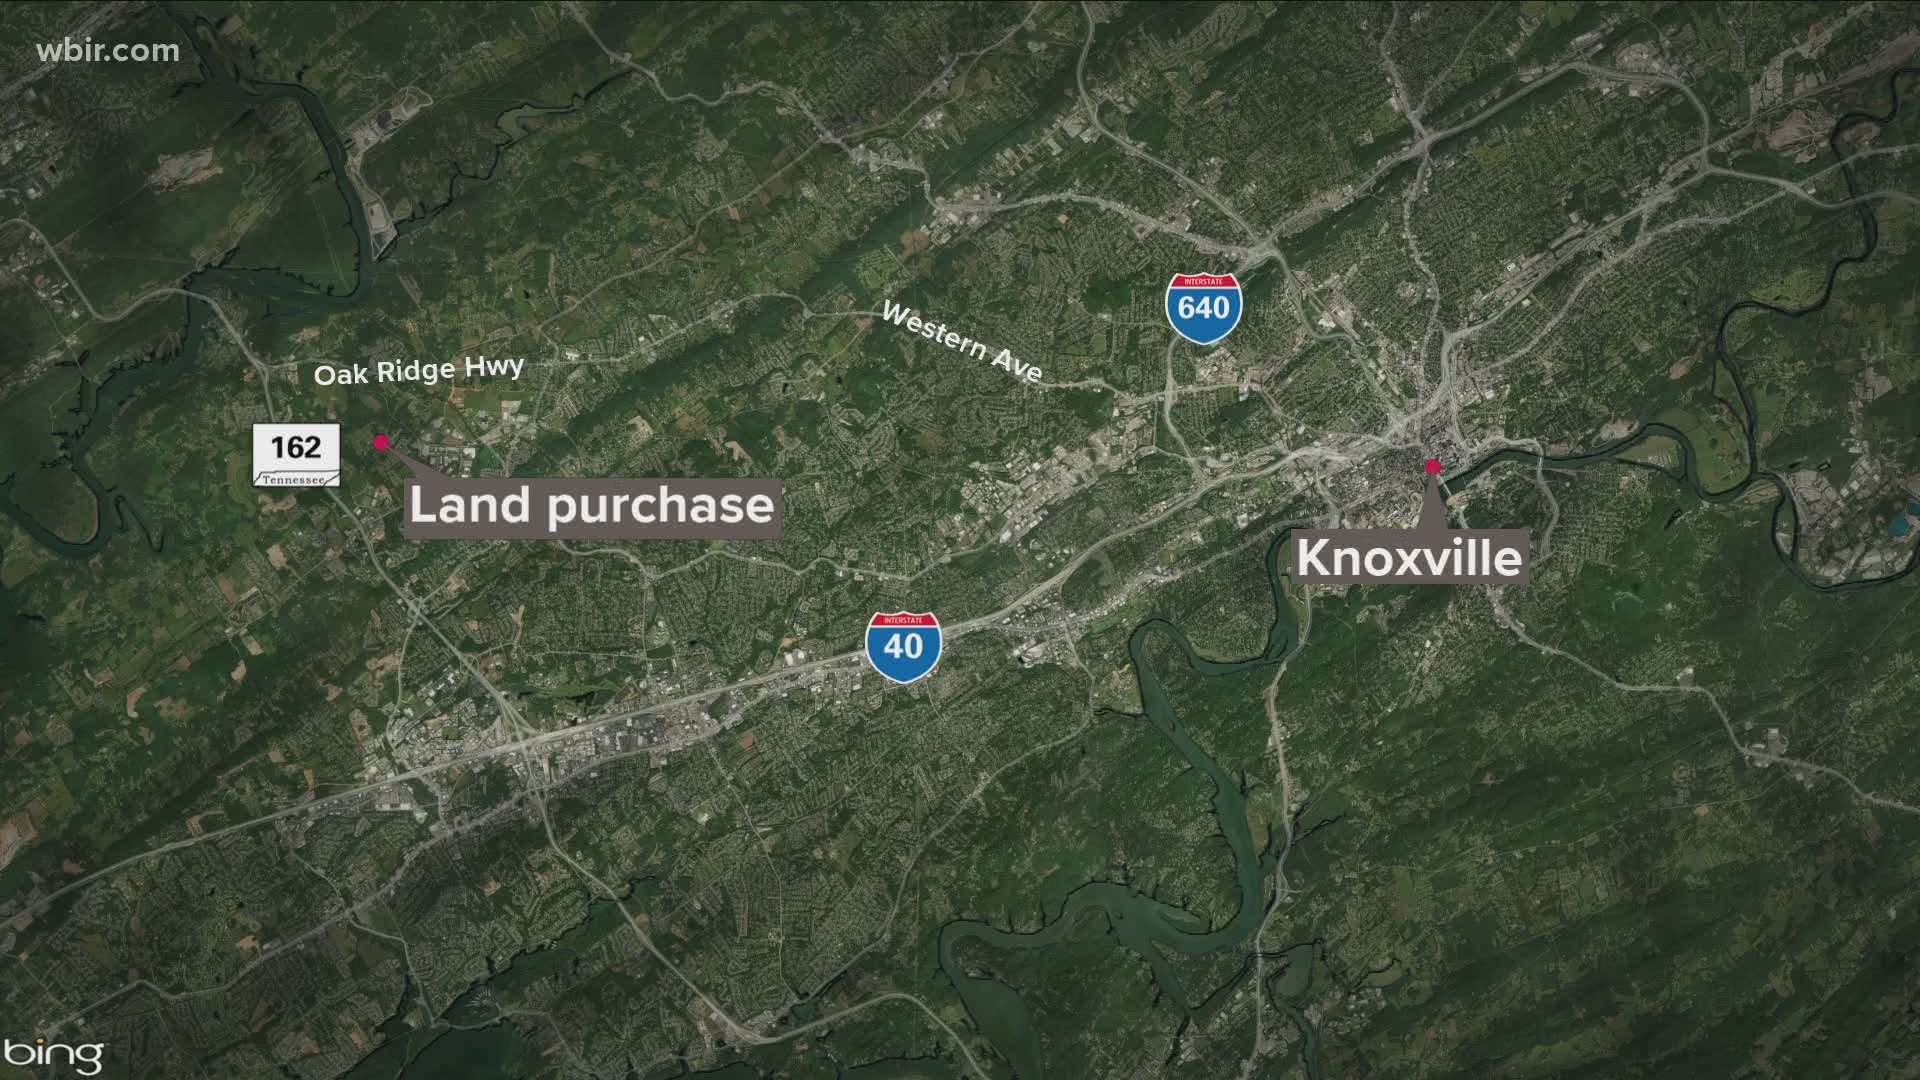 The Knox County Board of Education voted Wednesday night to buy land on Coward Mill Road in northwest Knox County for the school.